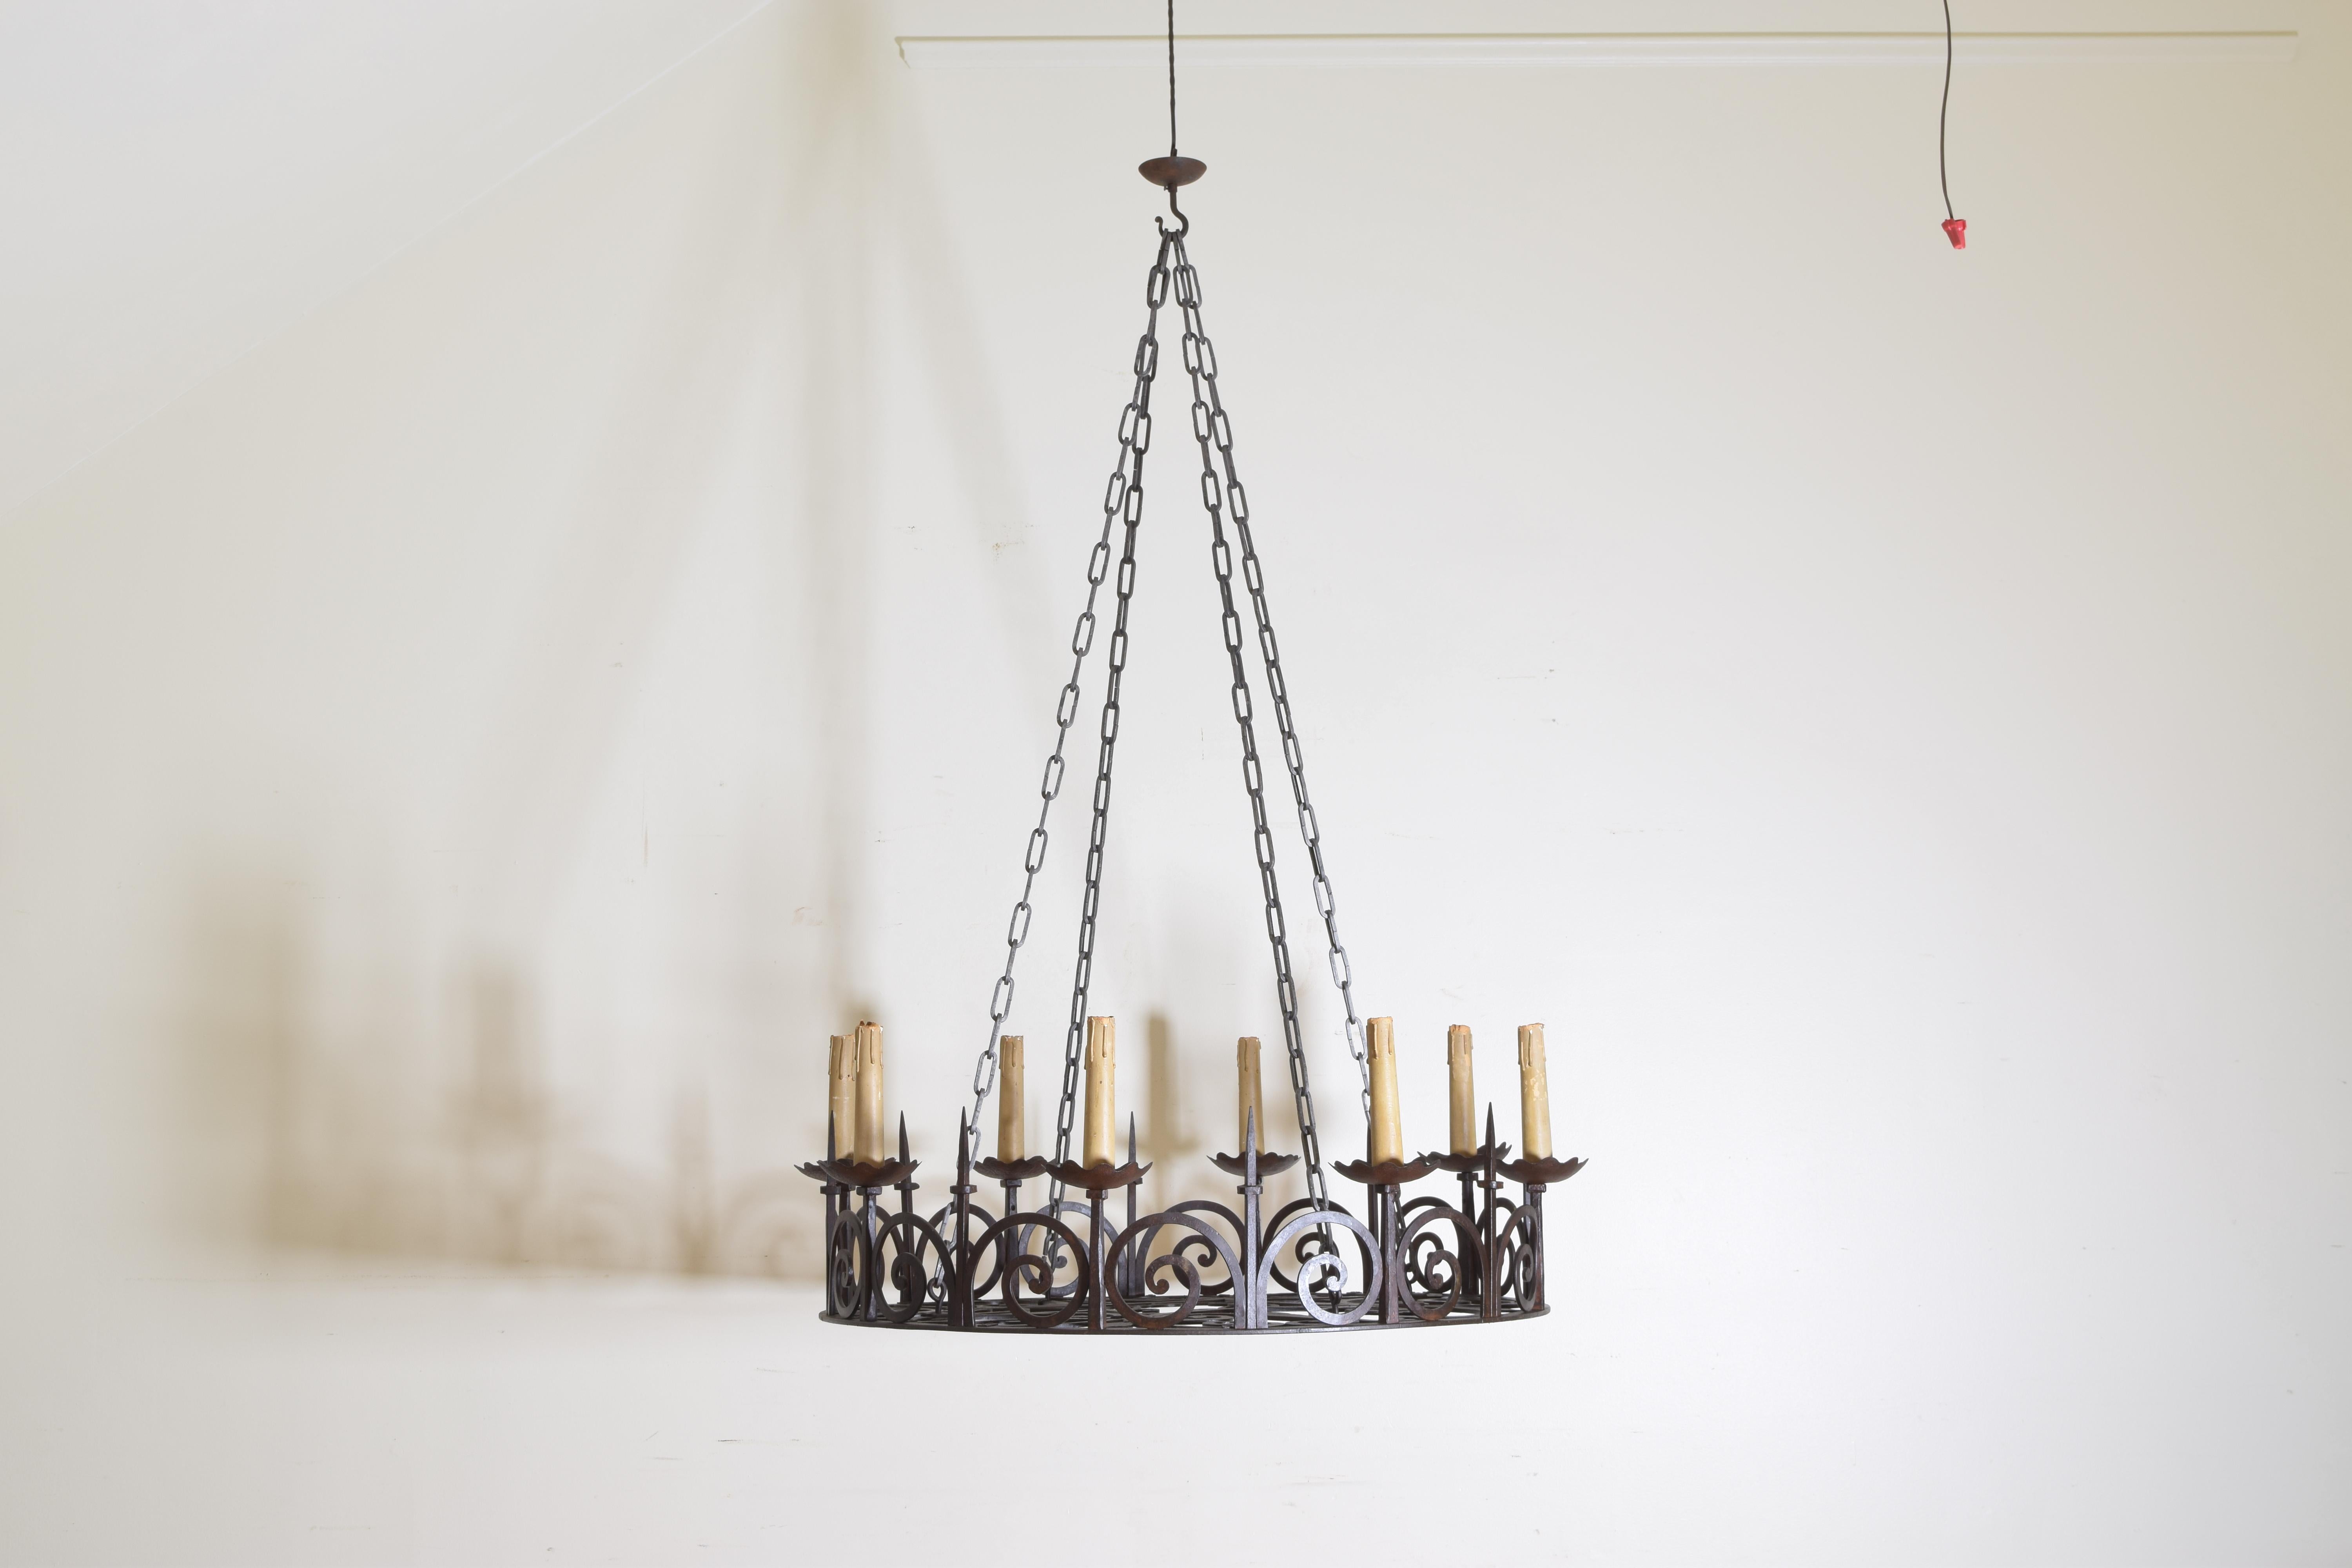 Suspended from four chains, these large banded chandeliers have elaborate hand wrought scrollwork in both the sides and bottoms, having large bobeches in turn with picket decorations.